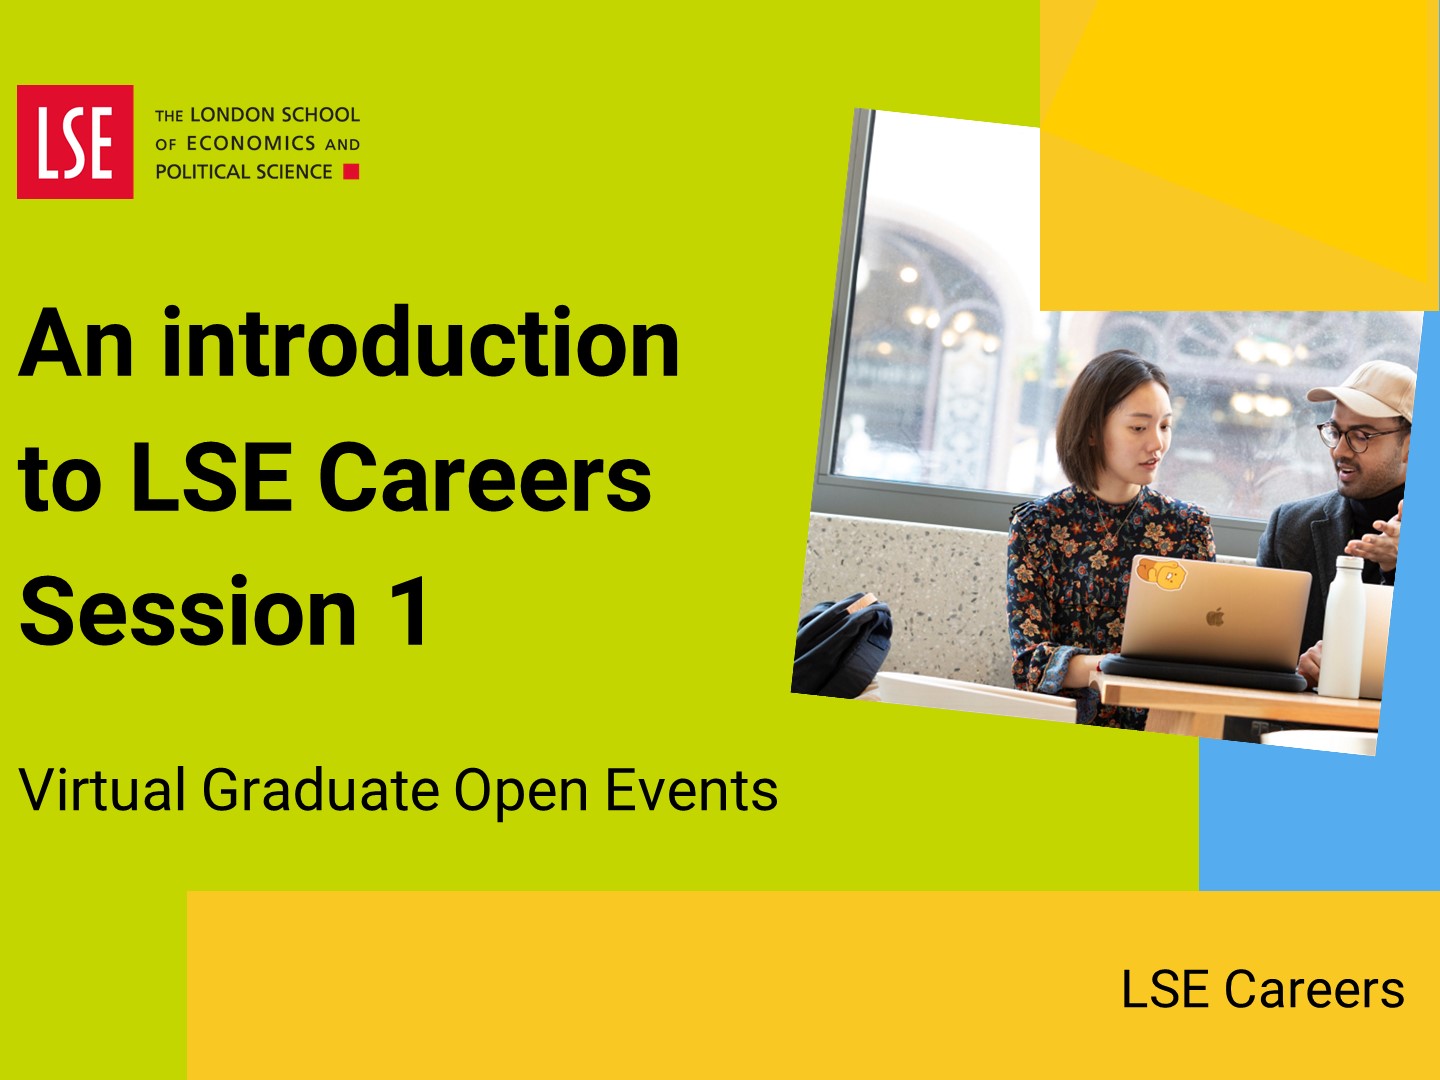 An introduction to LSE Careers Session 1